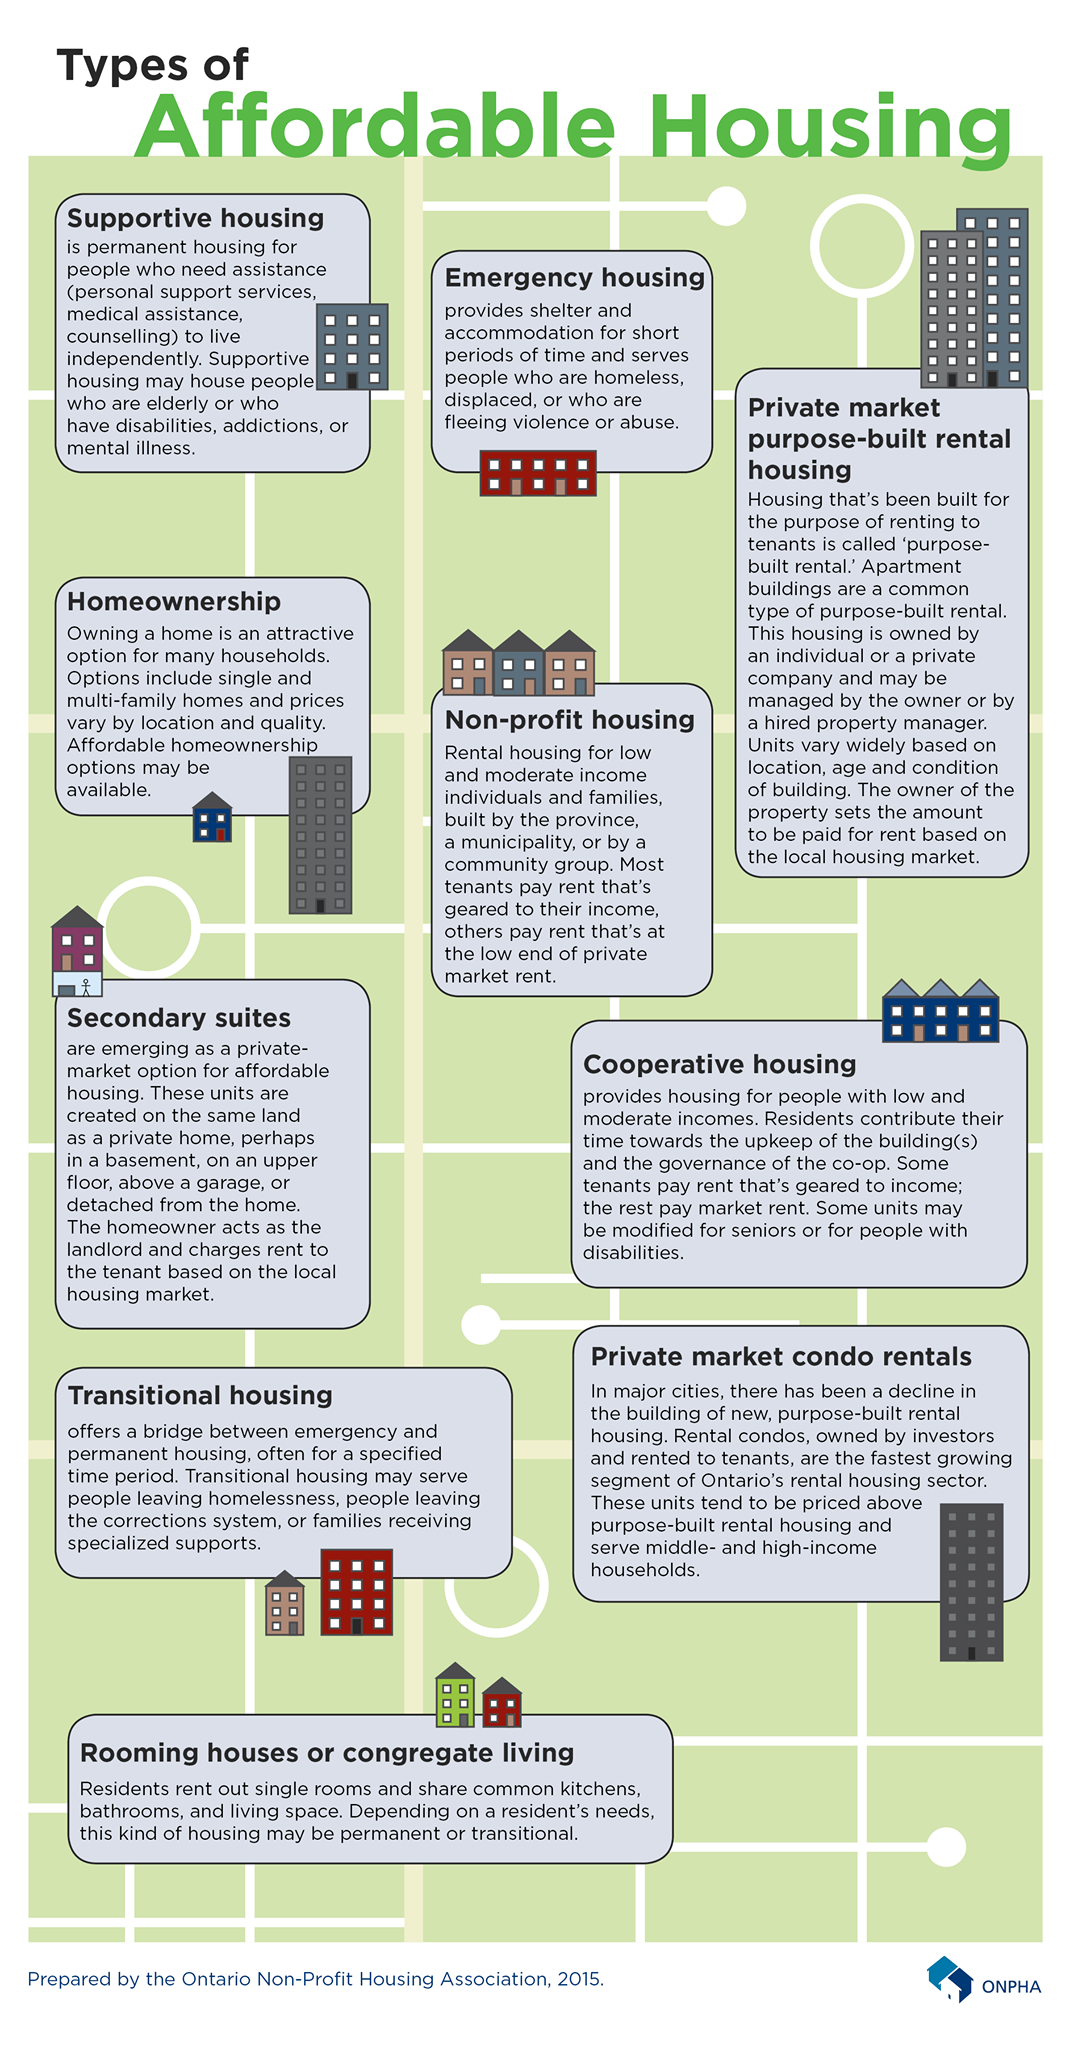 Types of affordable housing infographic from the Ontario Non-Profit Housing Association.